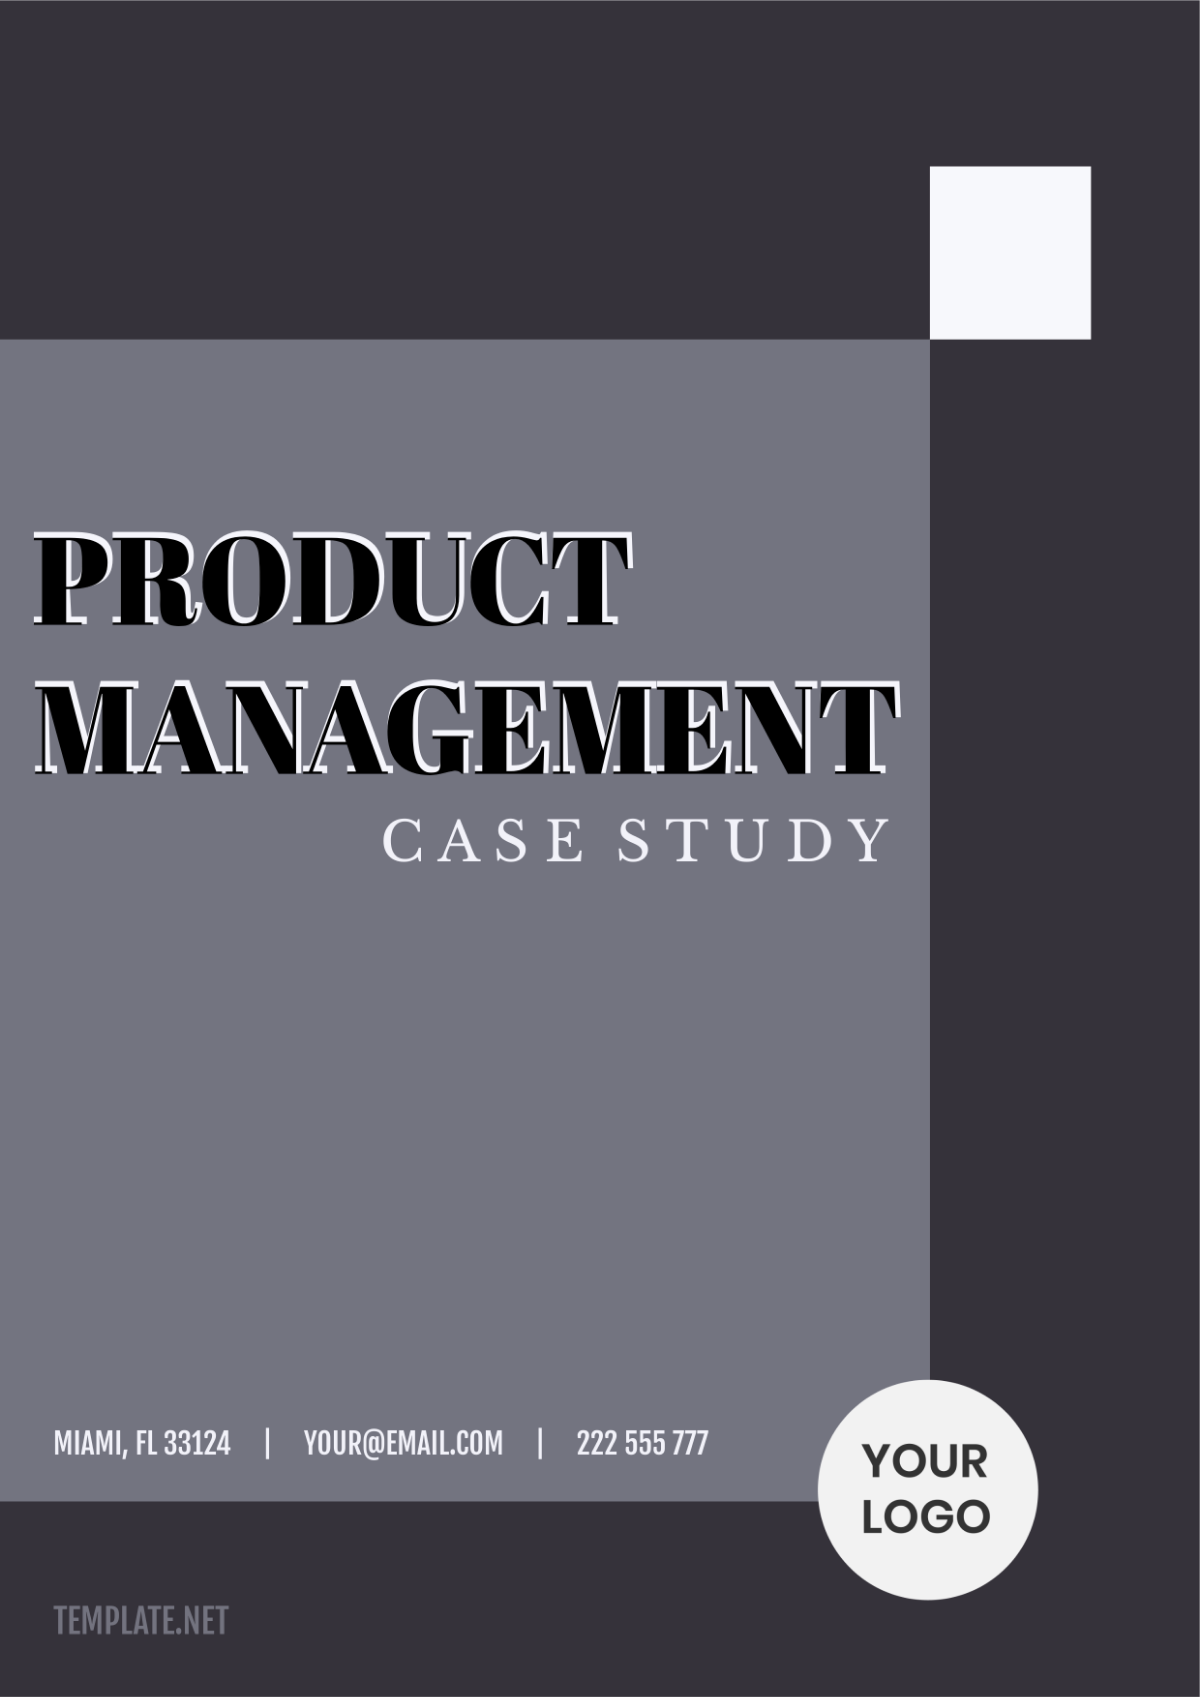 Product Manager Case Study Template